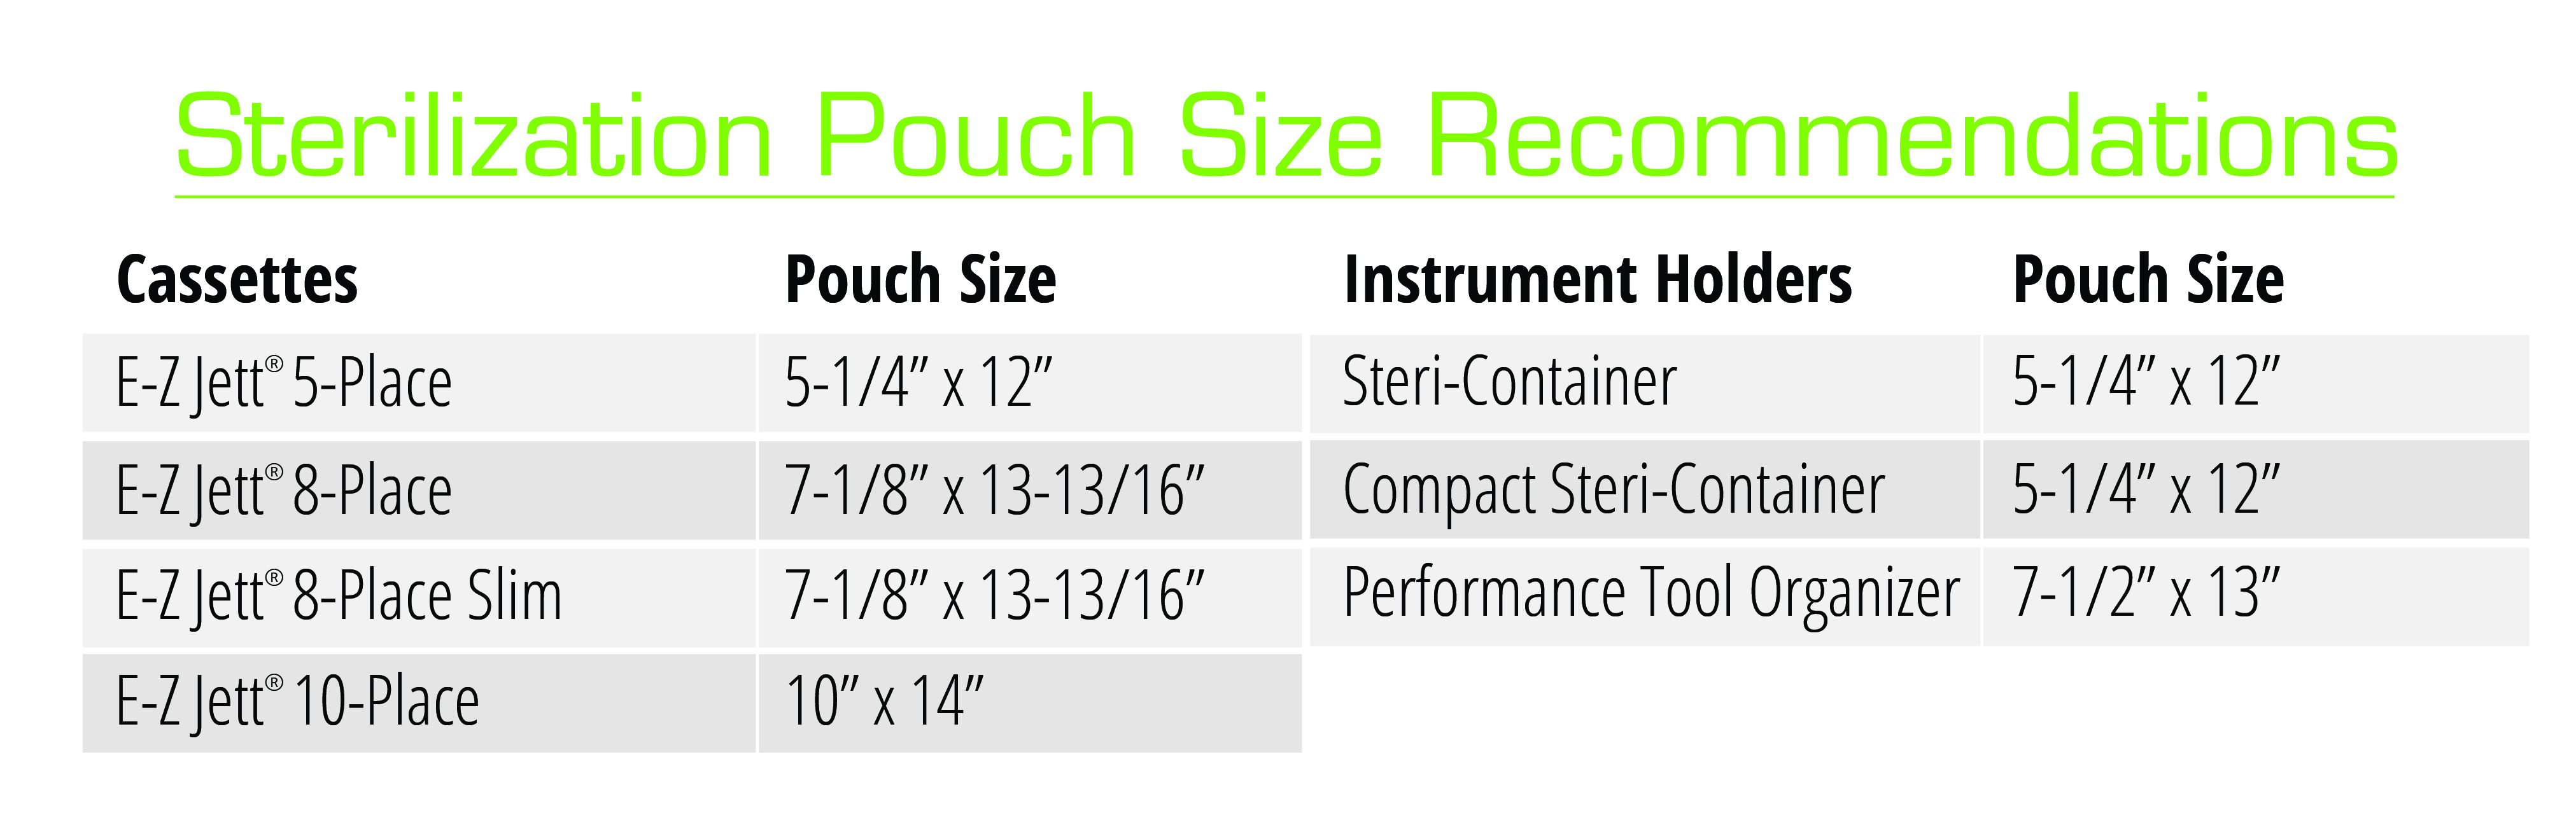 Product_Size_Charts-02.jpg